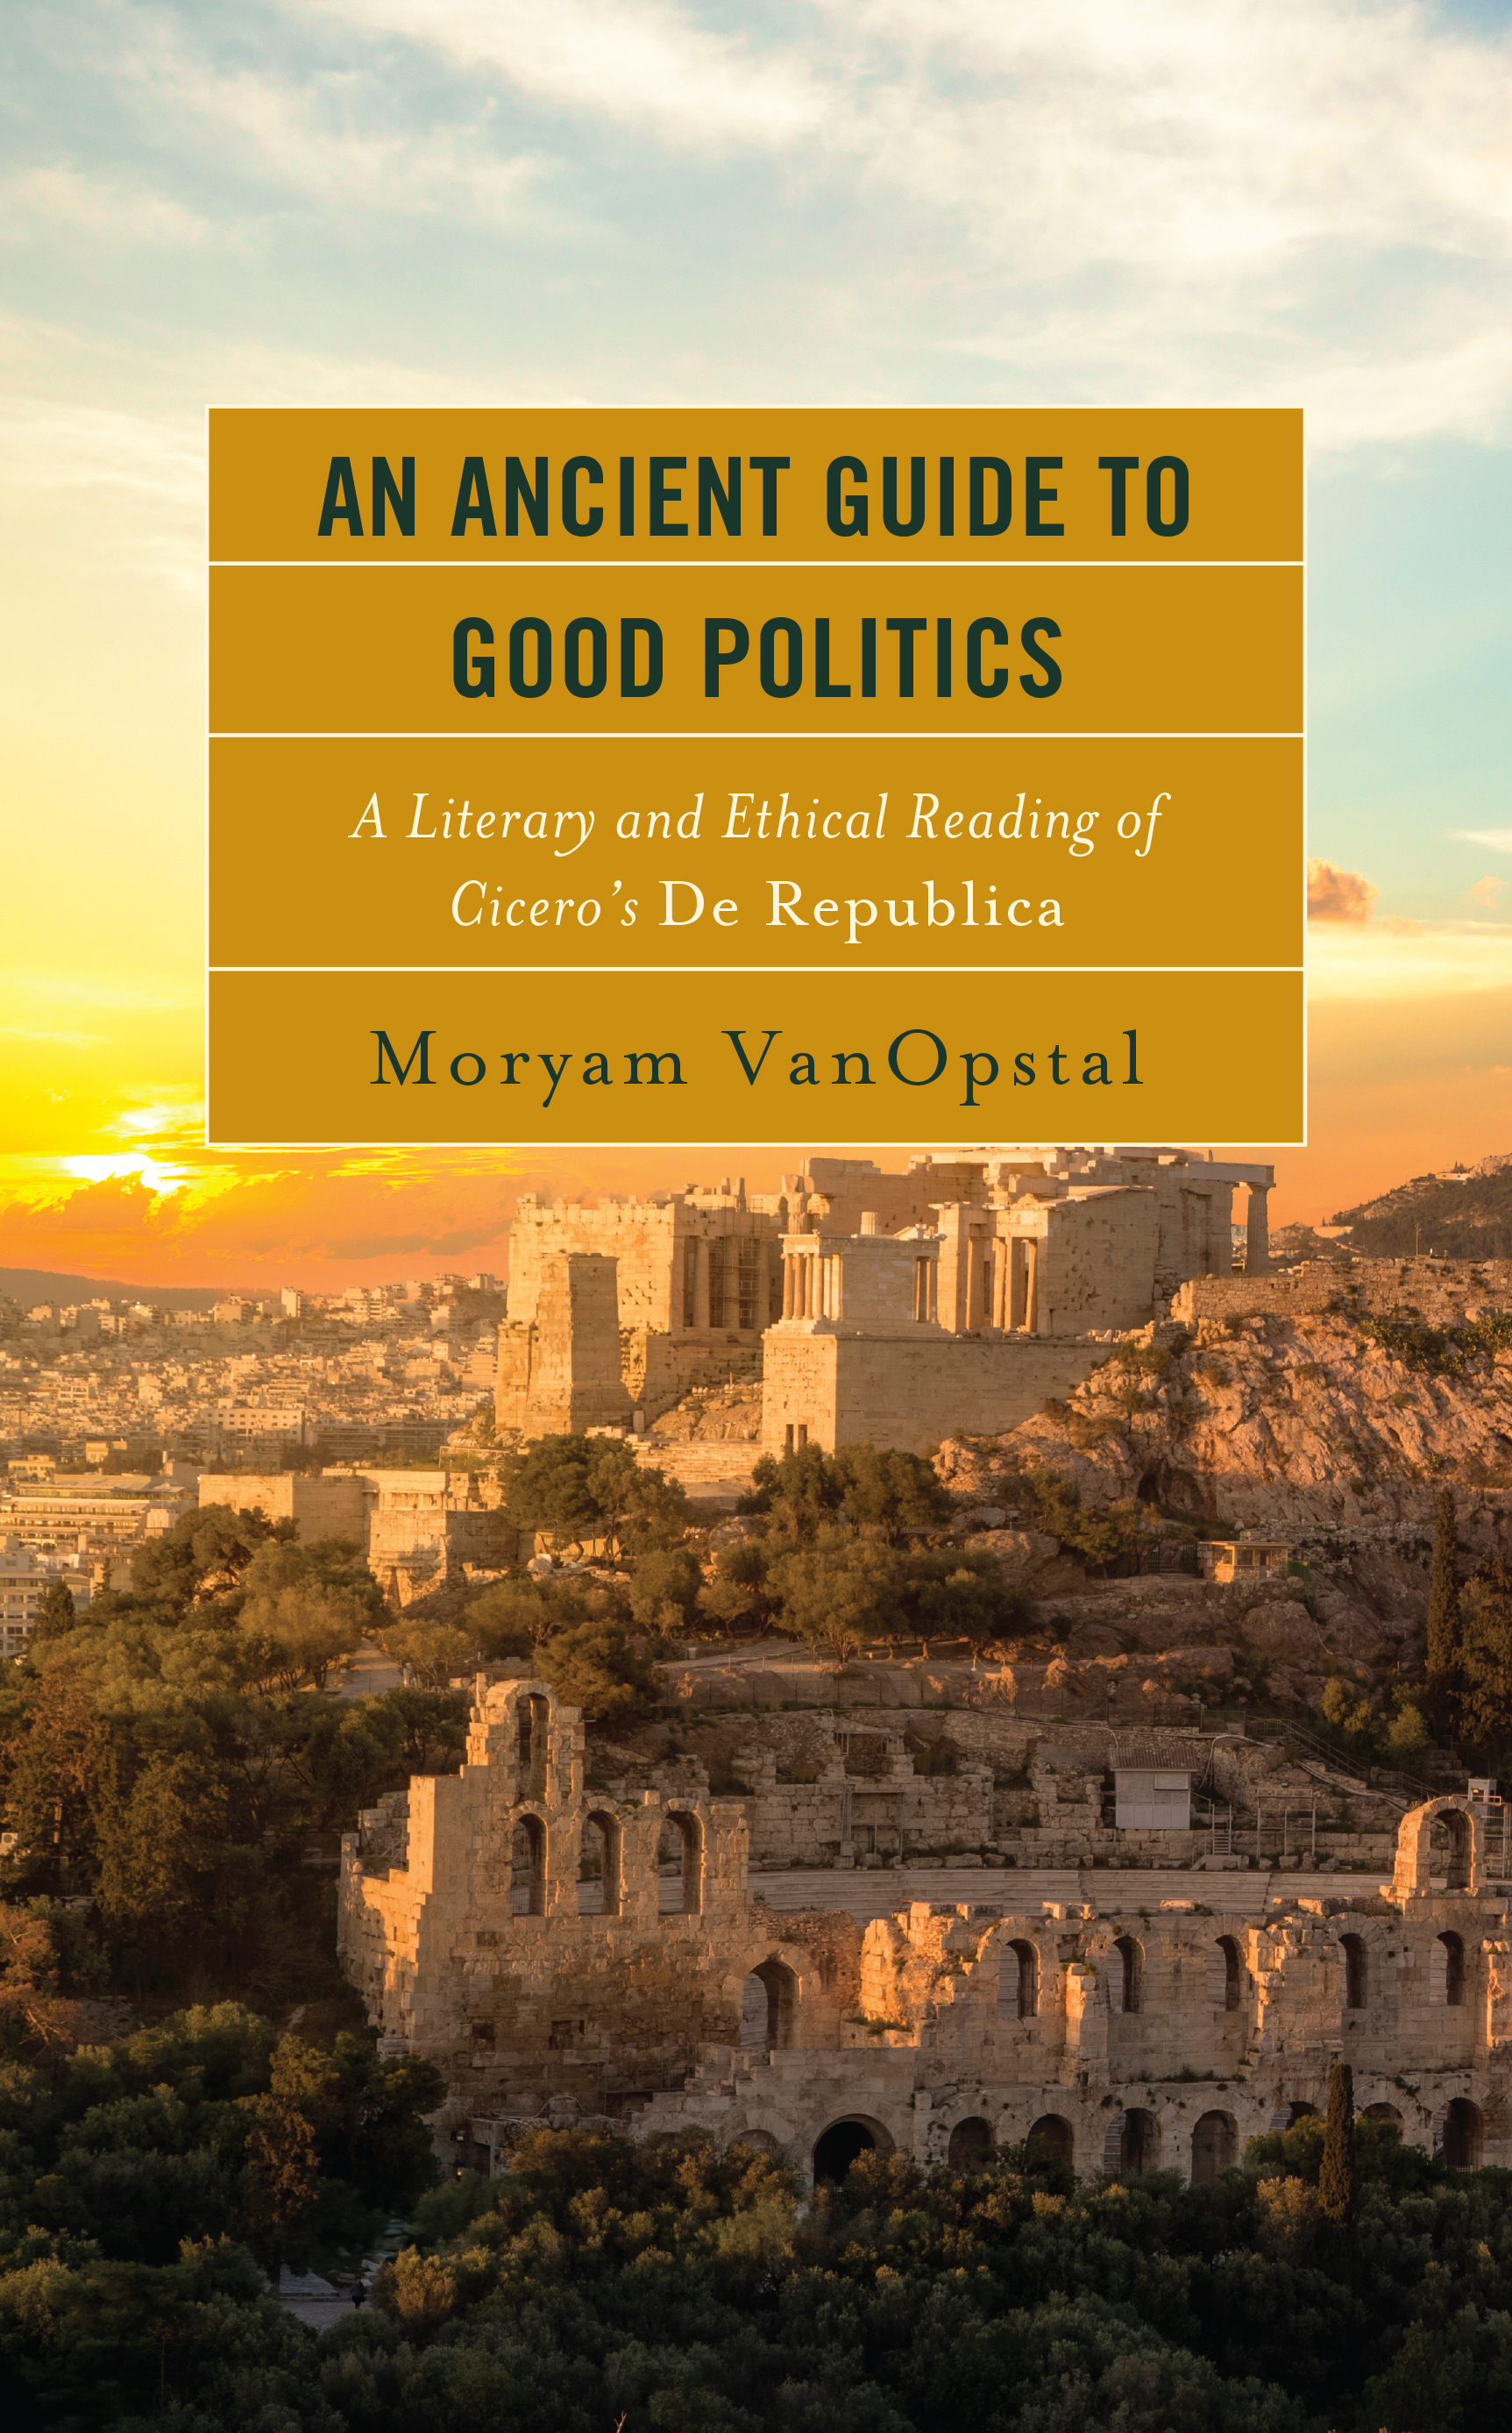 An Ancient Guide to Good Politics: A Literary and Ethical Reading of Cicero's De Republica